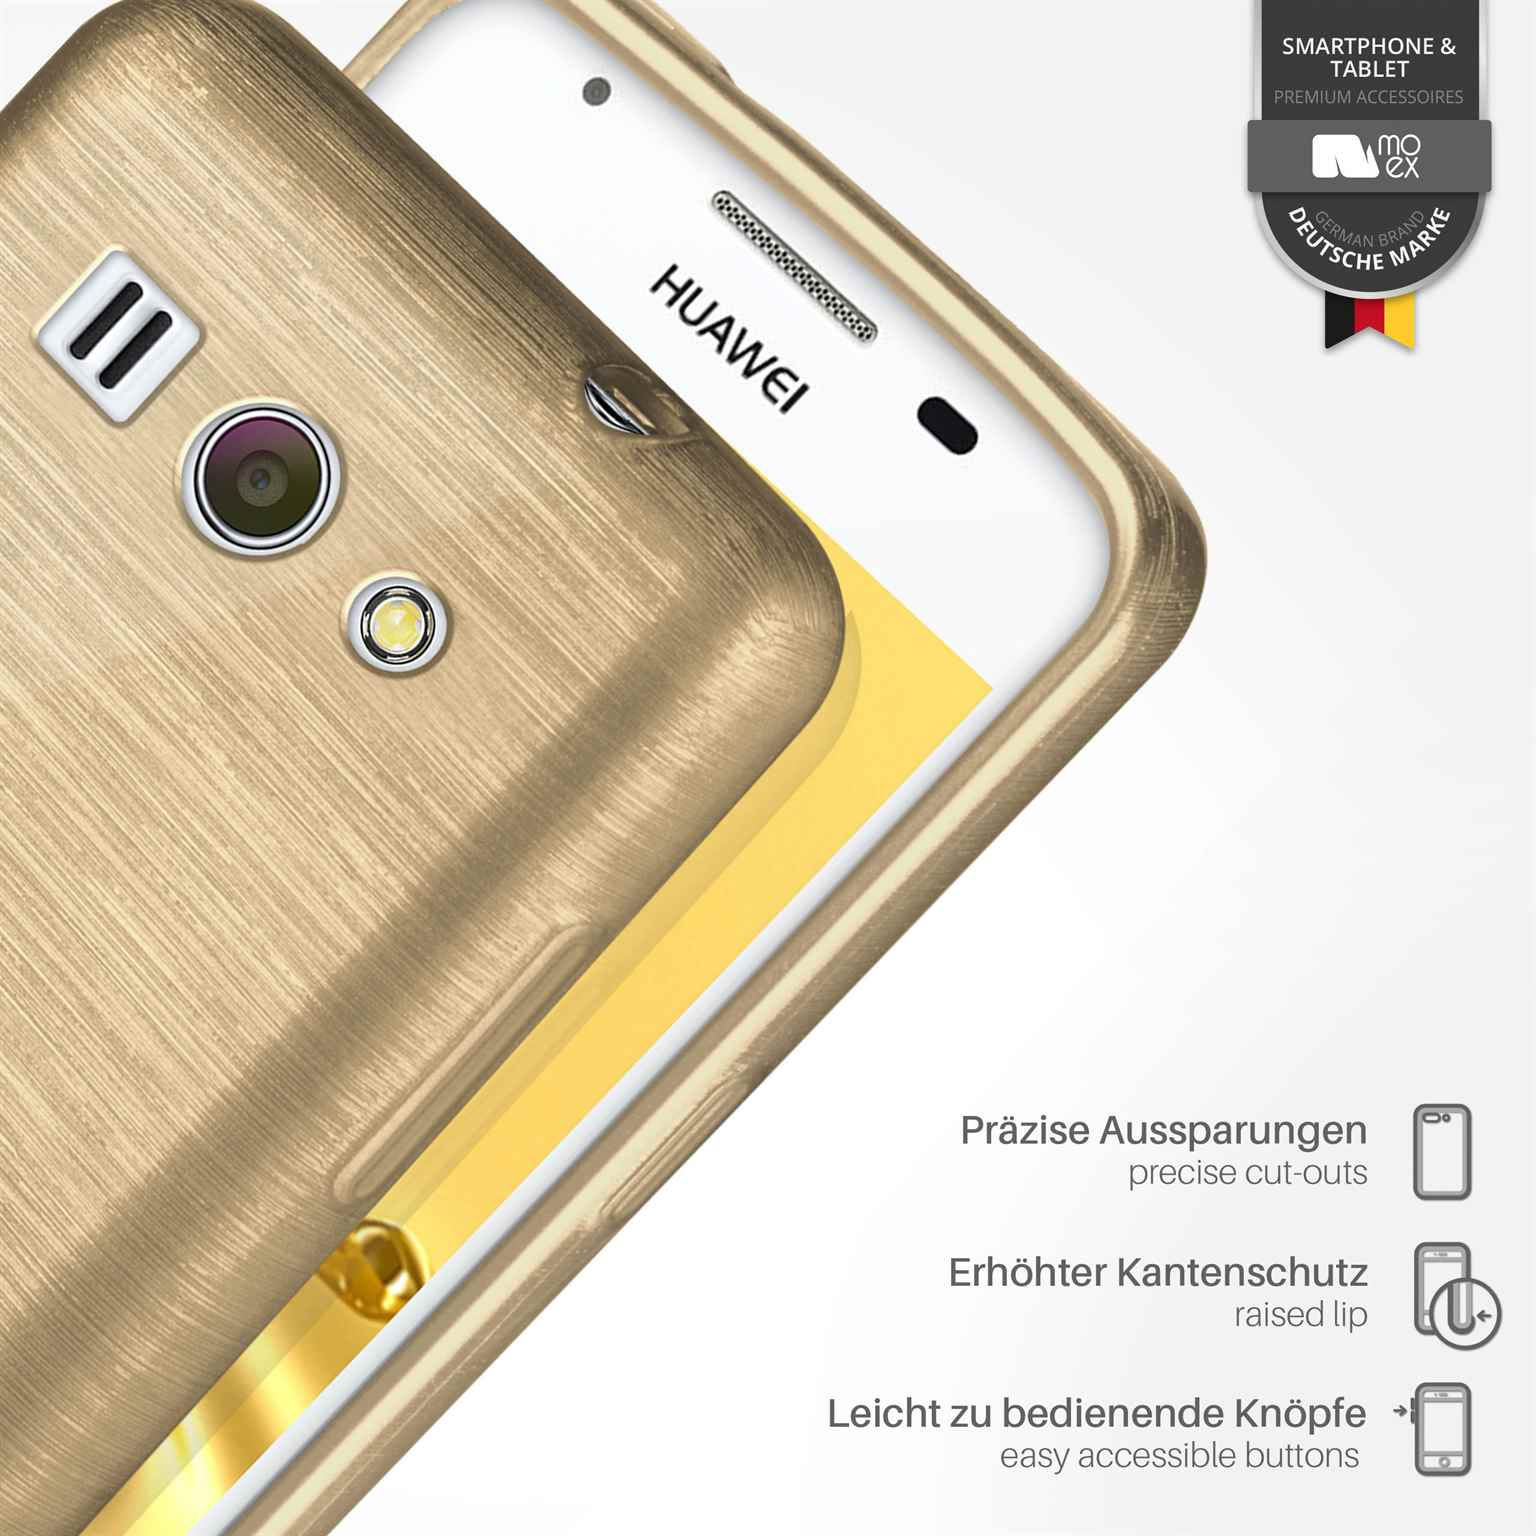 Case, Huawei, MOEX Backcover, Ivory-Gold Brushed G525, Ascend